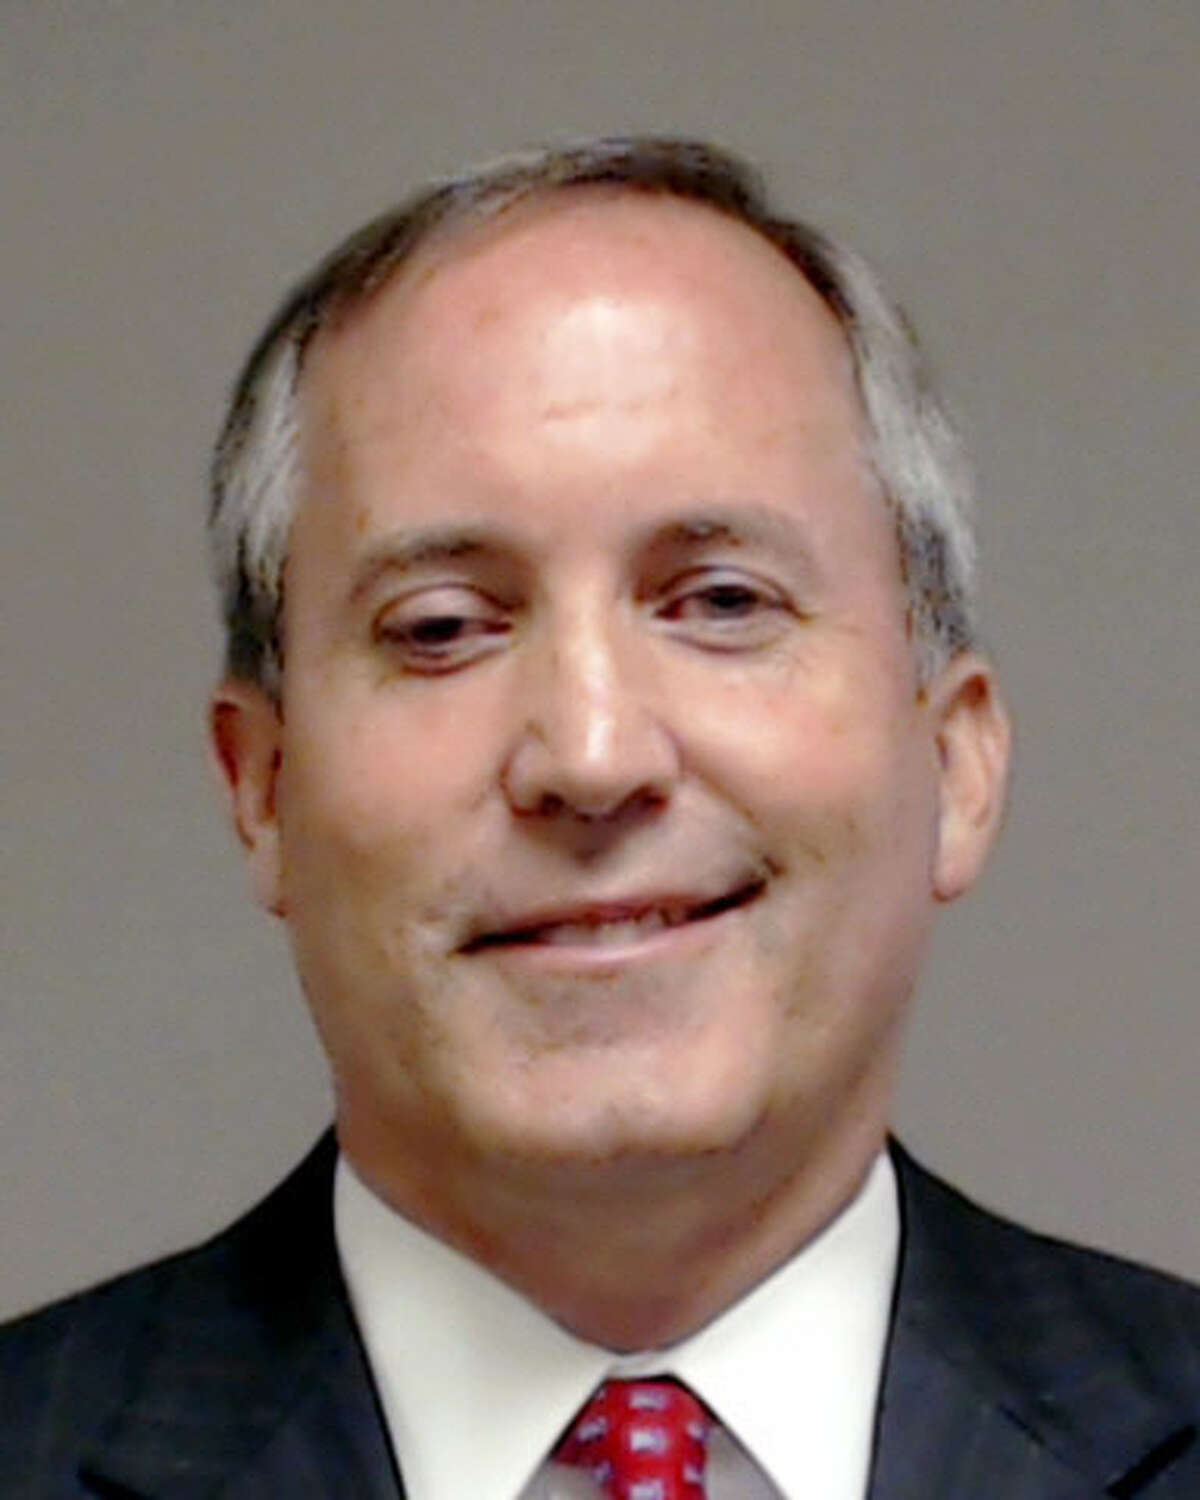 This handout photo provided by Collin County, Texas shows Texas Attorney General Kenneth Paxton, who was booked into the county jail Monday, Aug. 3, 2015, in McKinney, Texas. Take a closer look at some of the key numbers in the Paxton case. 